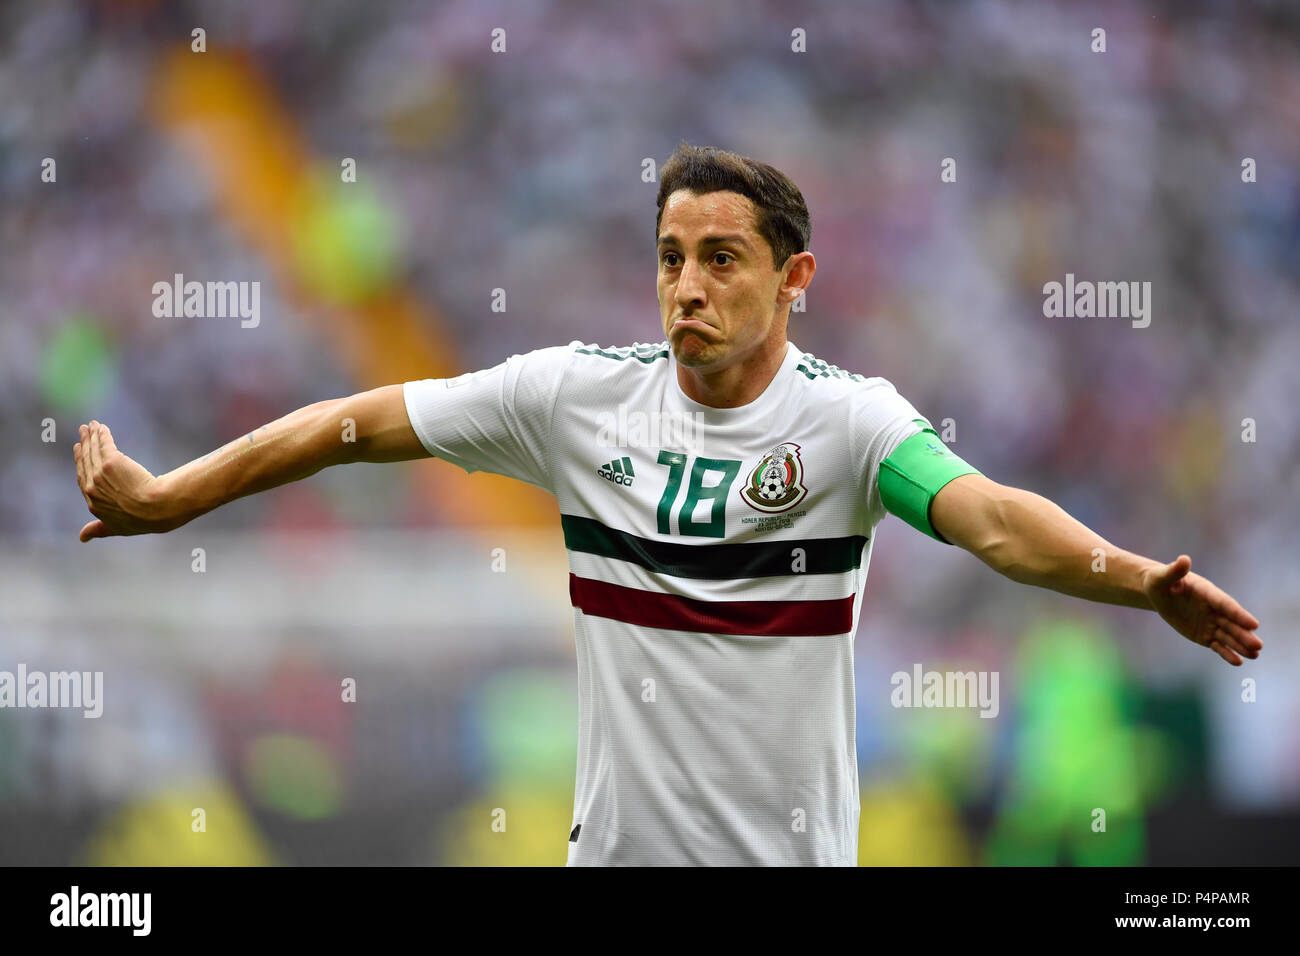 Rostov-on-Don, Russia. 23rd June, 2018. Soccer, FIFA World Cup 2018, South Korea vs Mexico, group stages, Group F, 2nd matchday at the Rostov-on-Don Stadium. Andres Guardado from Mexico in action. Credit: Marius Becker/dpa/Alamy Live News Credit: dpa picture alliance/Alamy Live News Stock Photo